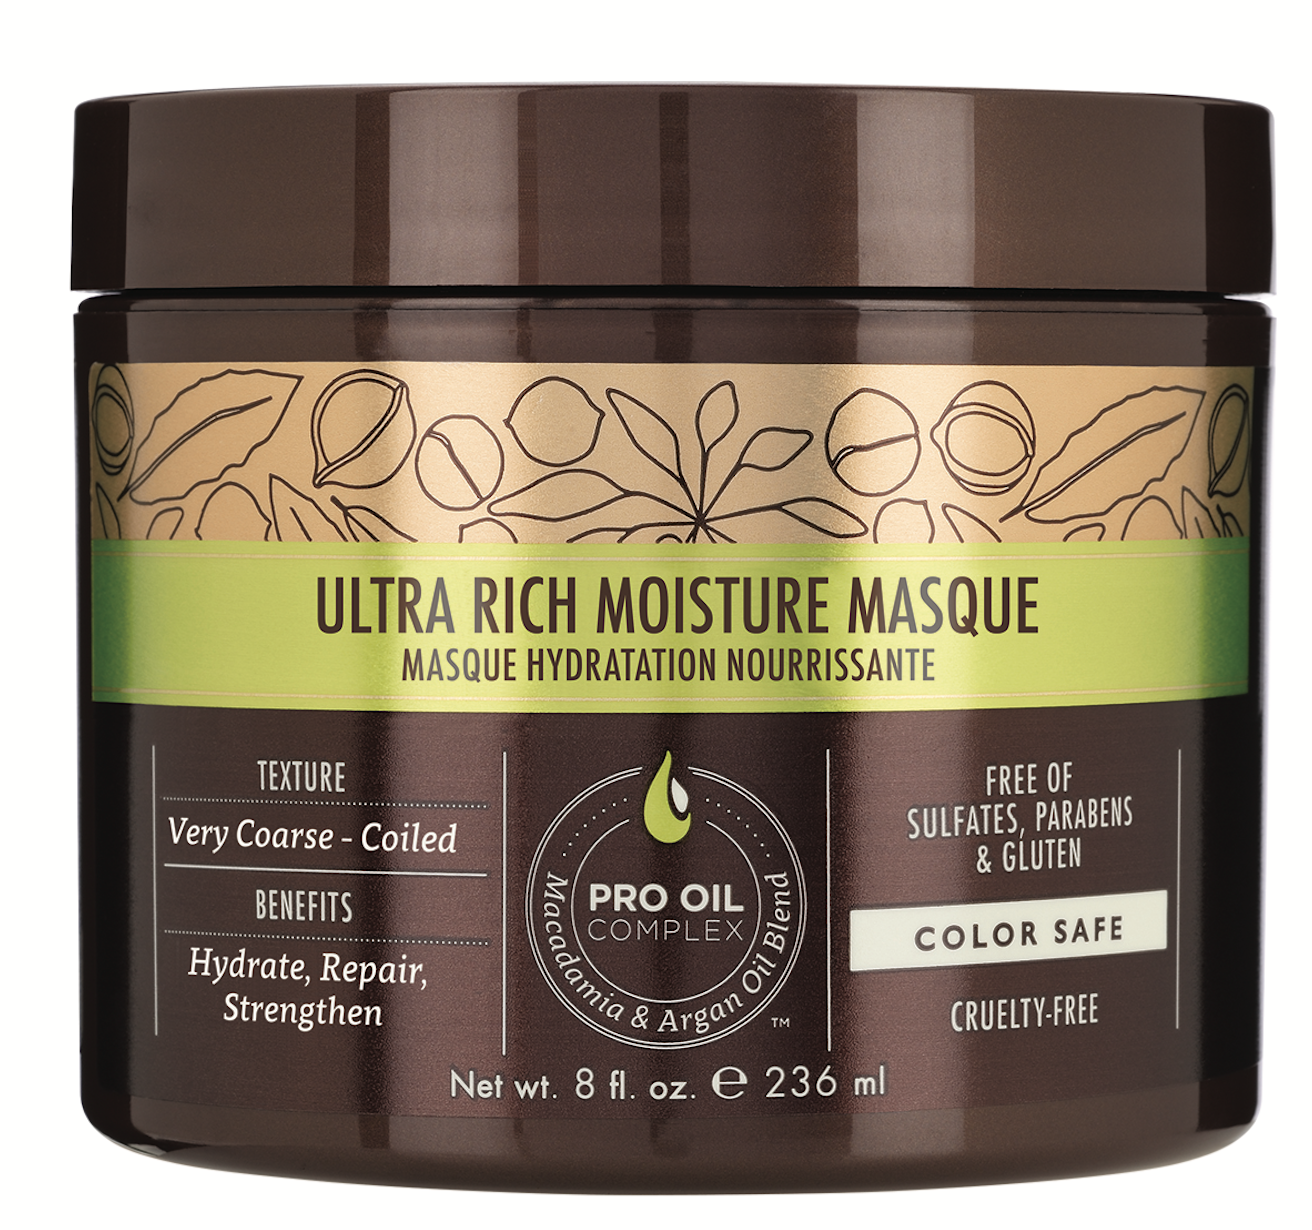 Formulated with shea butter and mongongo macadamia and argan oils Macadamia Professional Ultra Rich Moisture Masque infuses